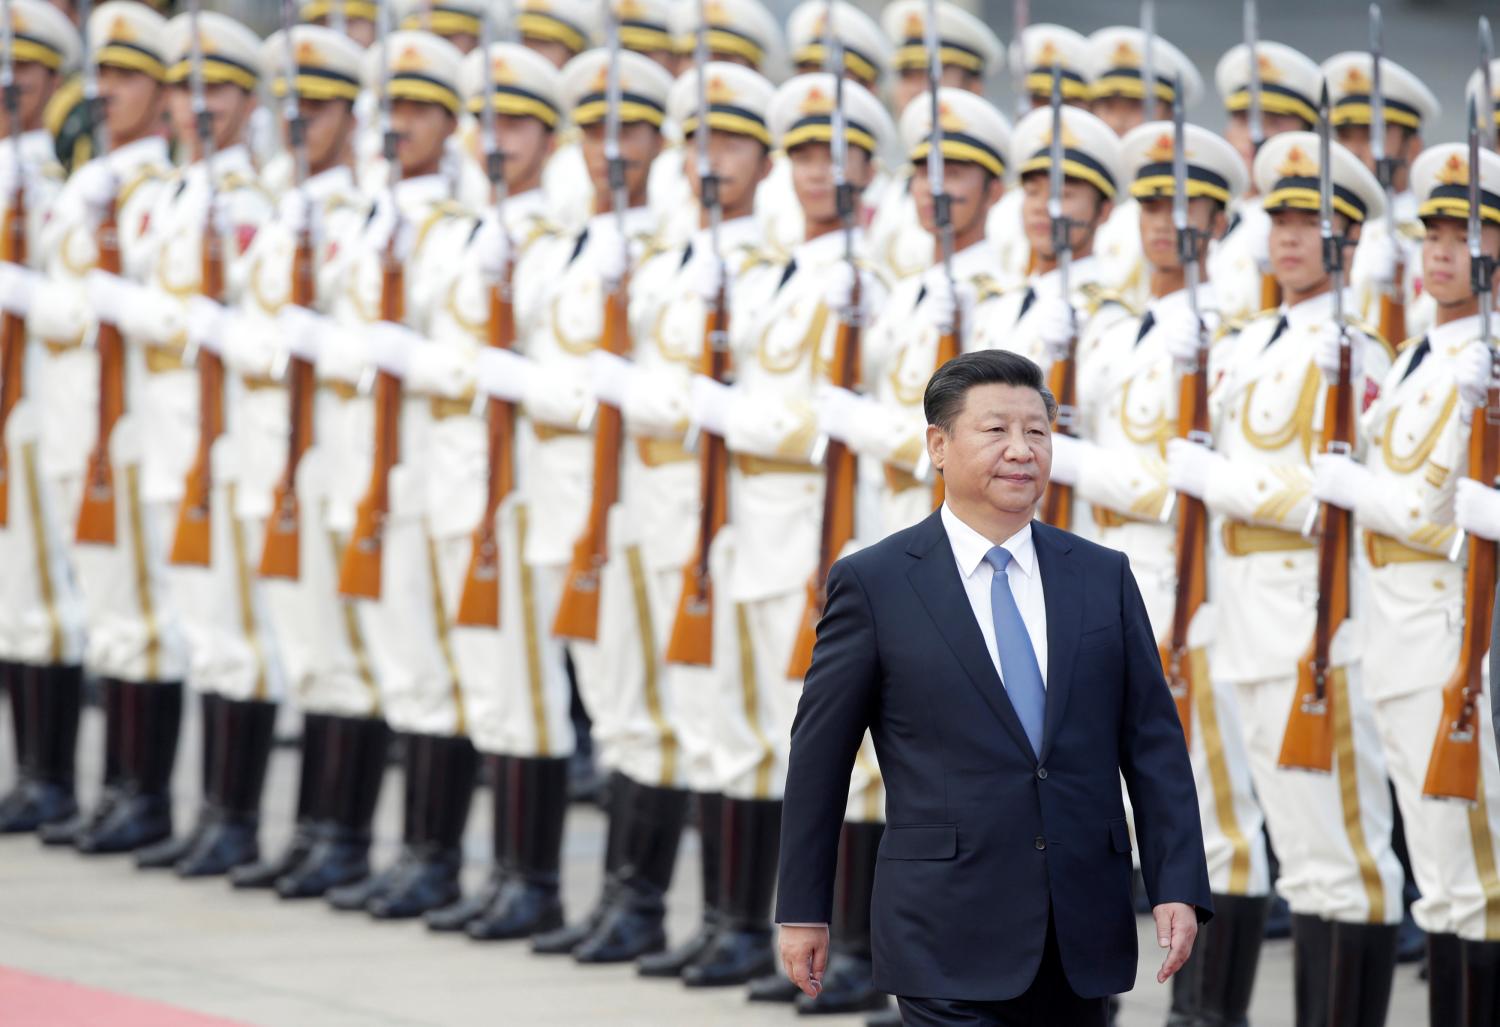 China's President Xi Jinping reviews honour guards during a welcoming ceremony for Peru's President Pedro Pablo Kuczynski (not in picture) at the Great Hall of the People in Beijing, China, September 13, 2016. REUTERS/Jason Lee - RTSNI5U